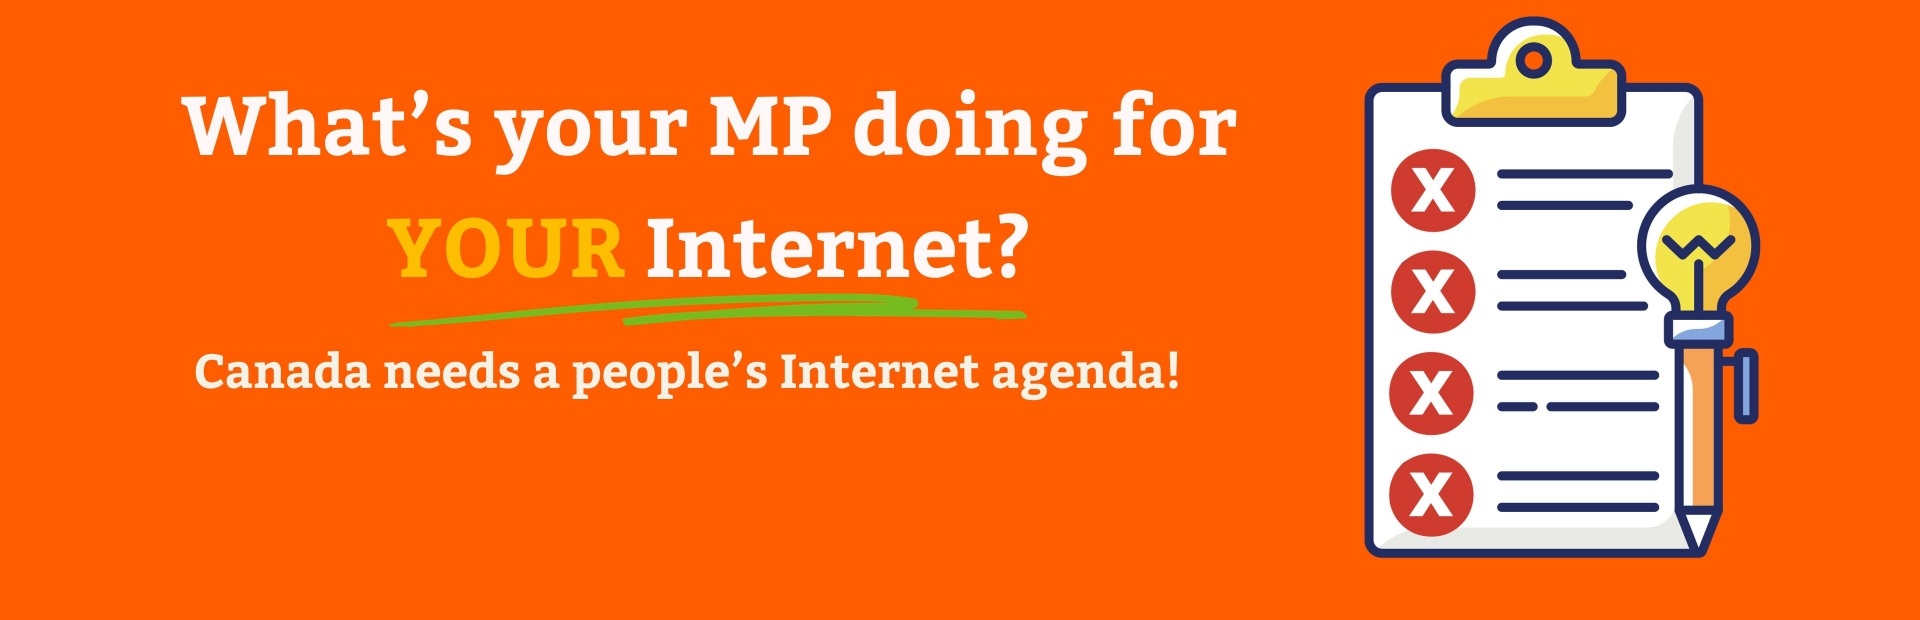 Ask your MP: What are they doing for YOUR Internet?